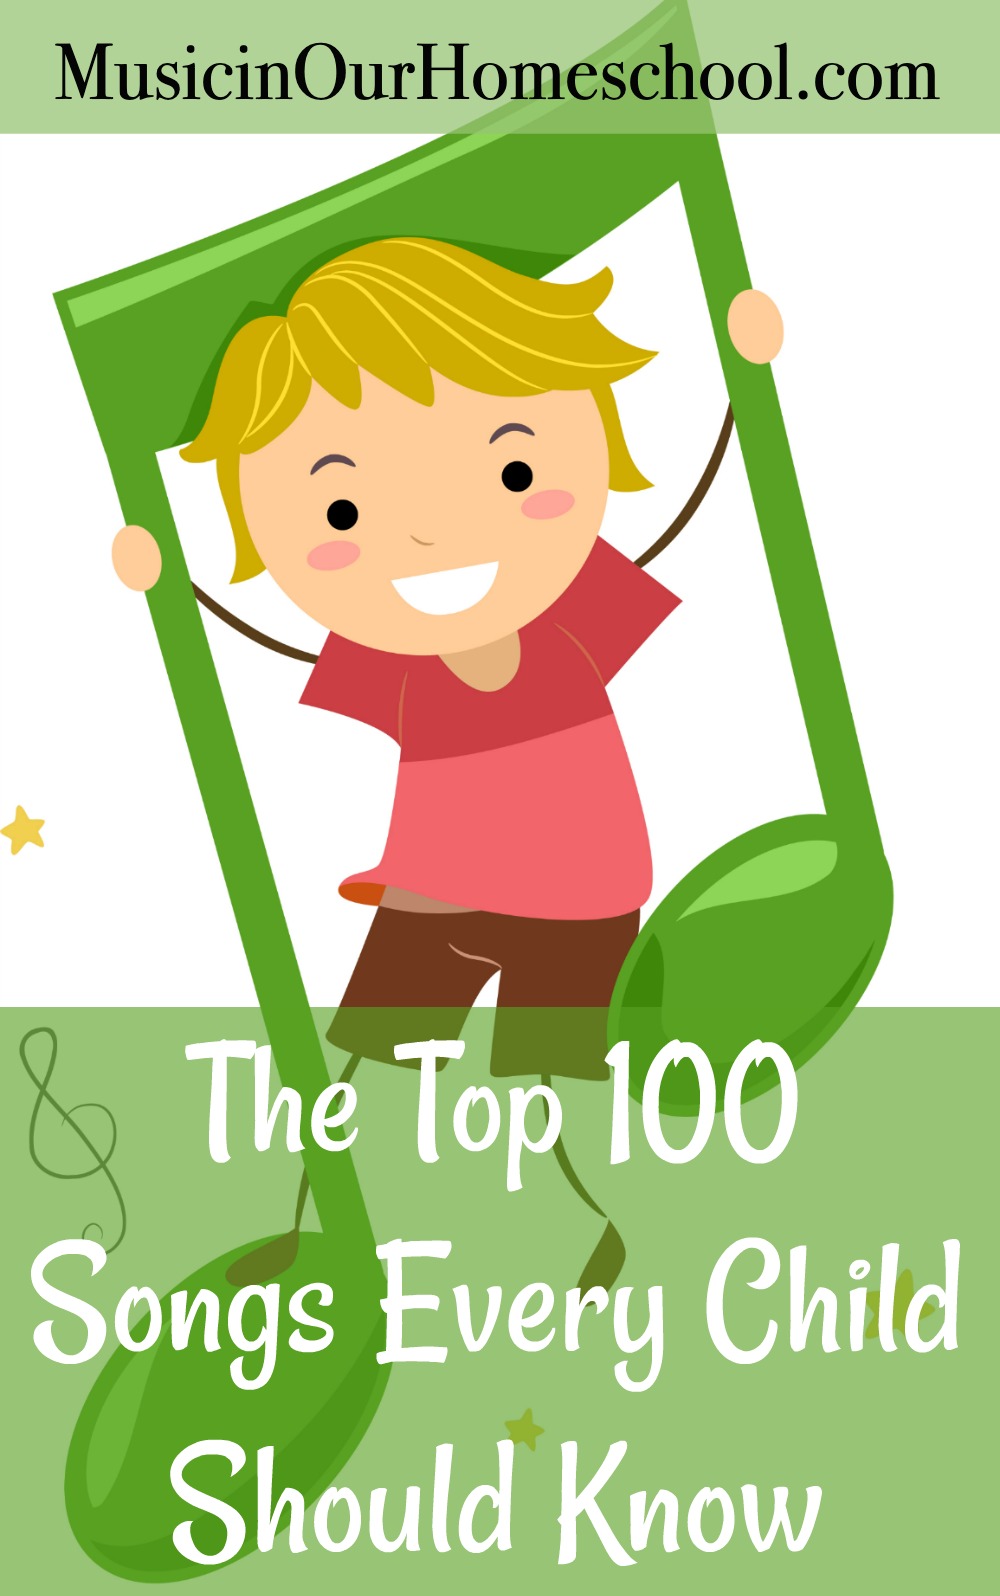 The Top 100 Songs Every Child Should Know - Music in Our Homeschool